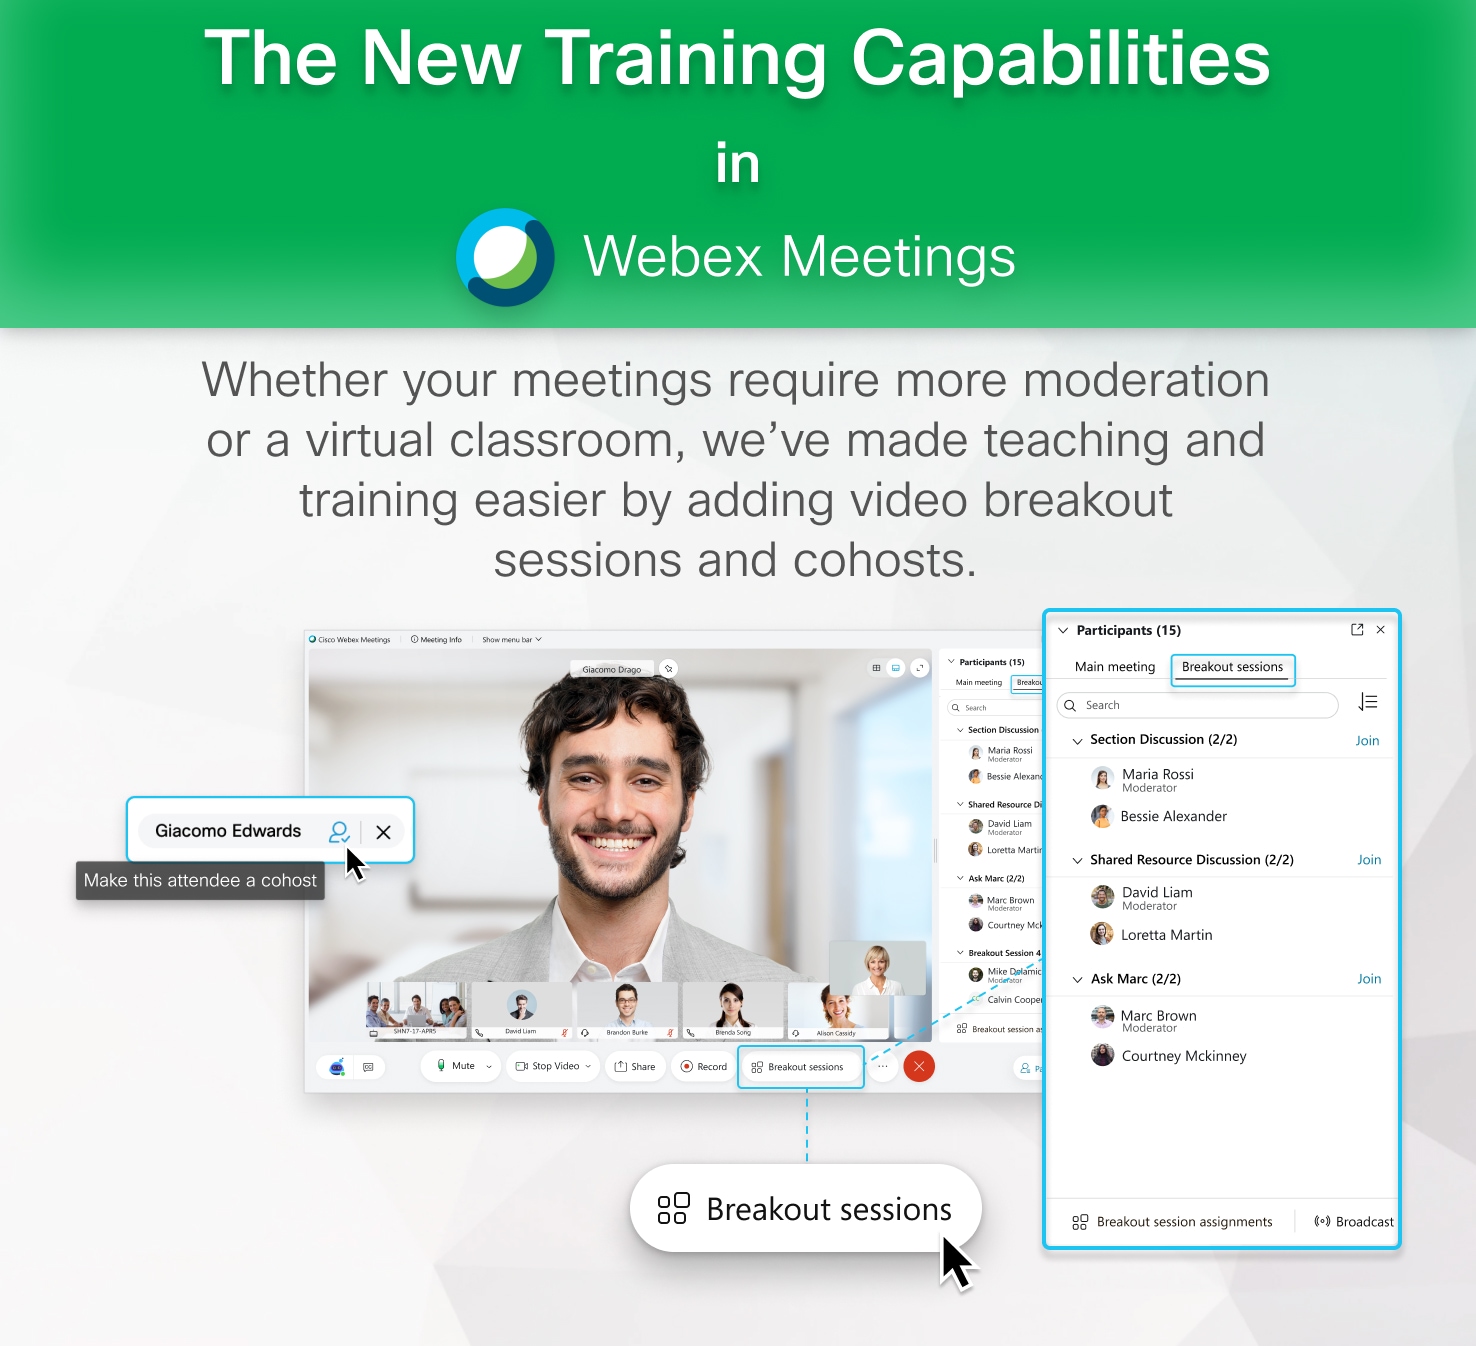 We've made training easier by adding video vreakout sessions and cohosts.